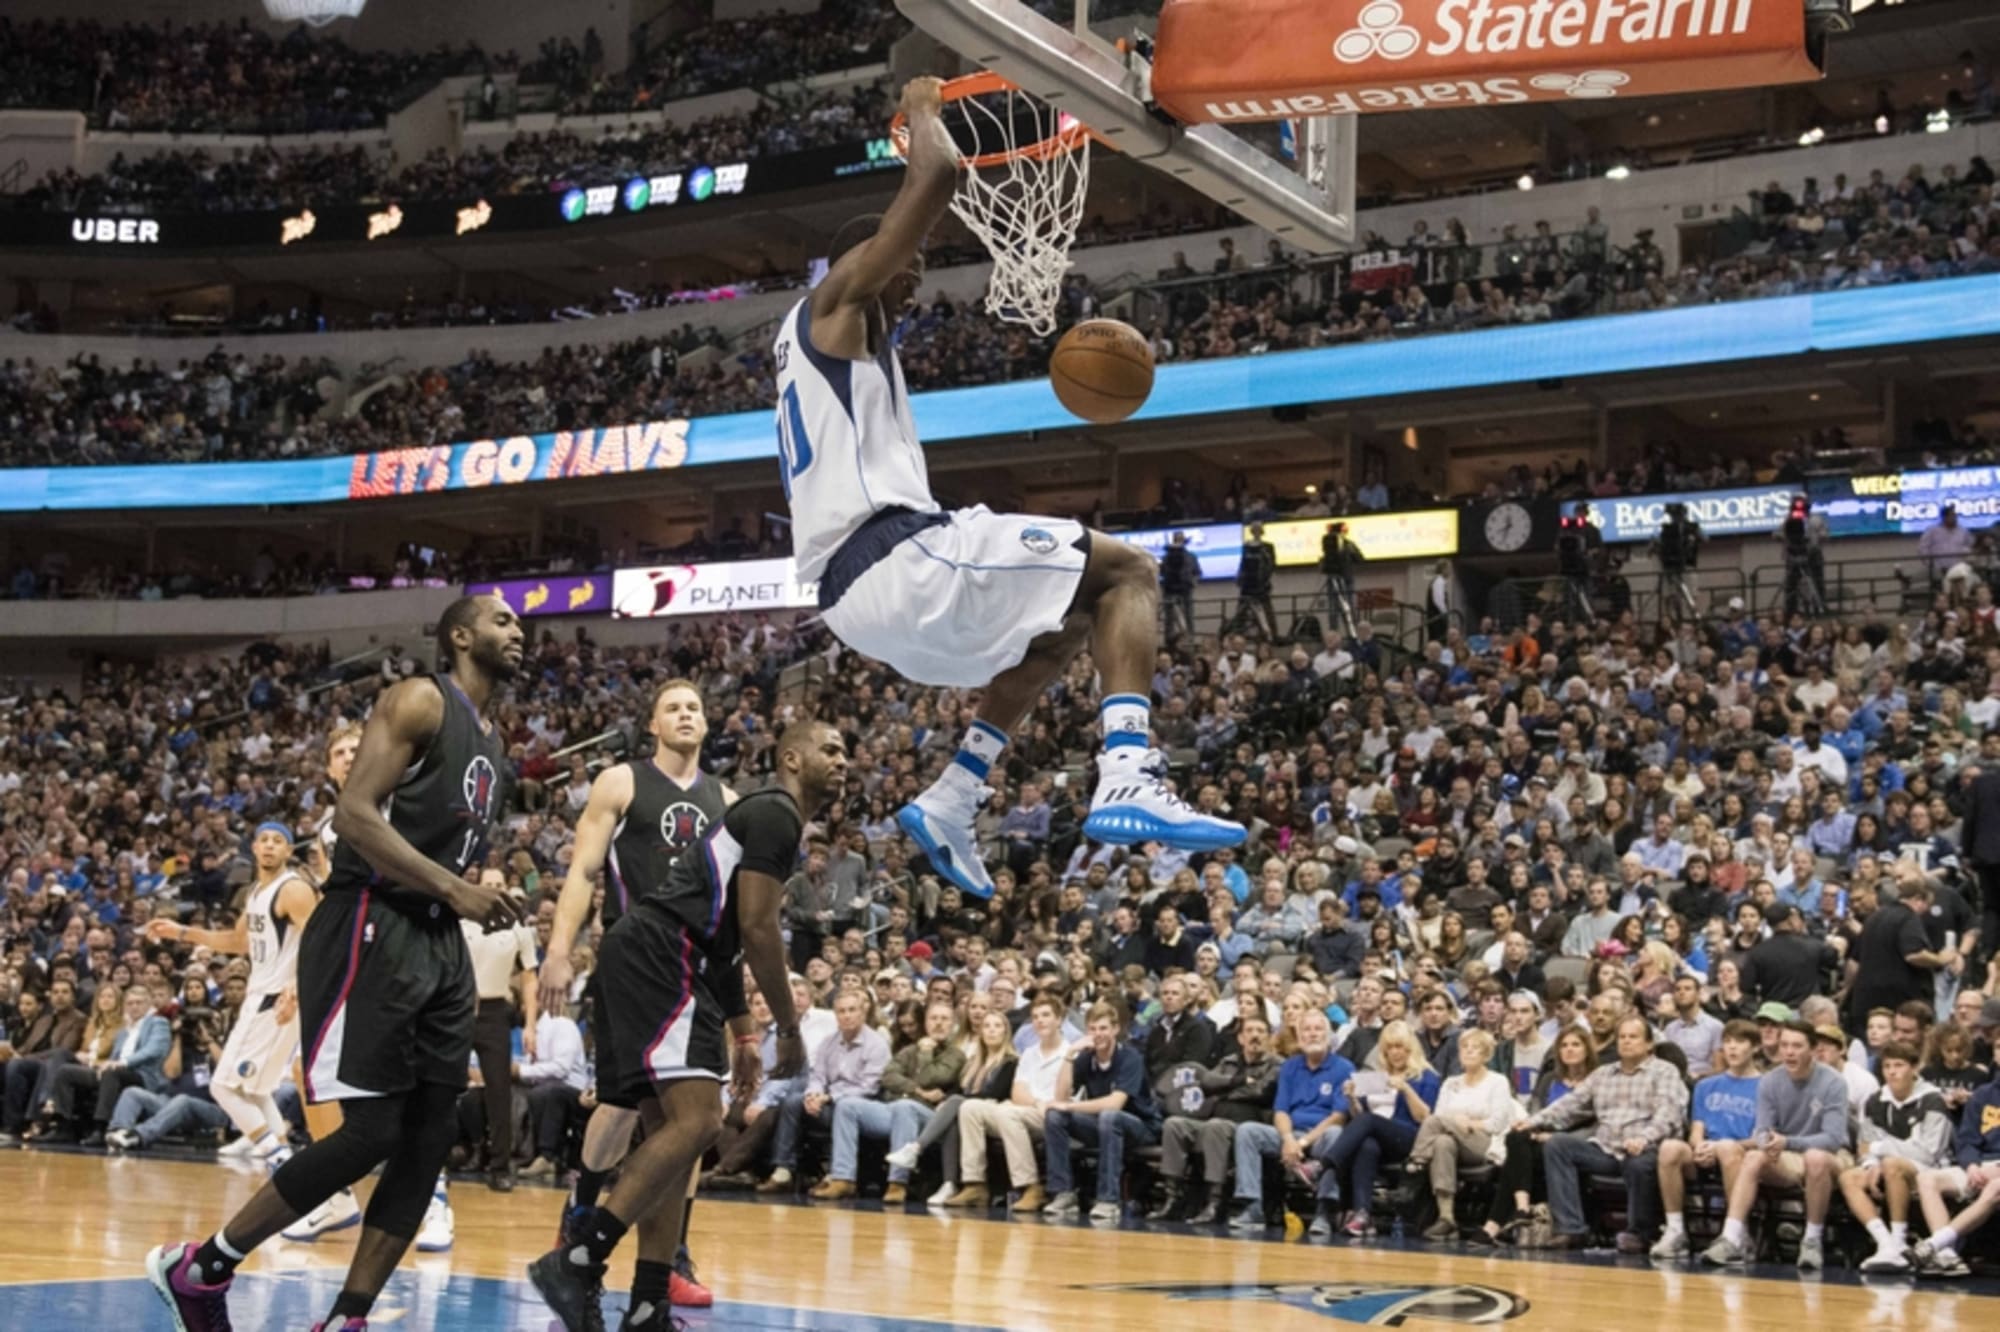 Mavericks Fall to Clippers in Chippy Contest